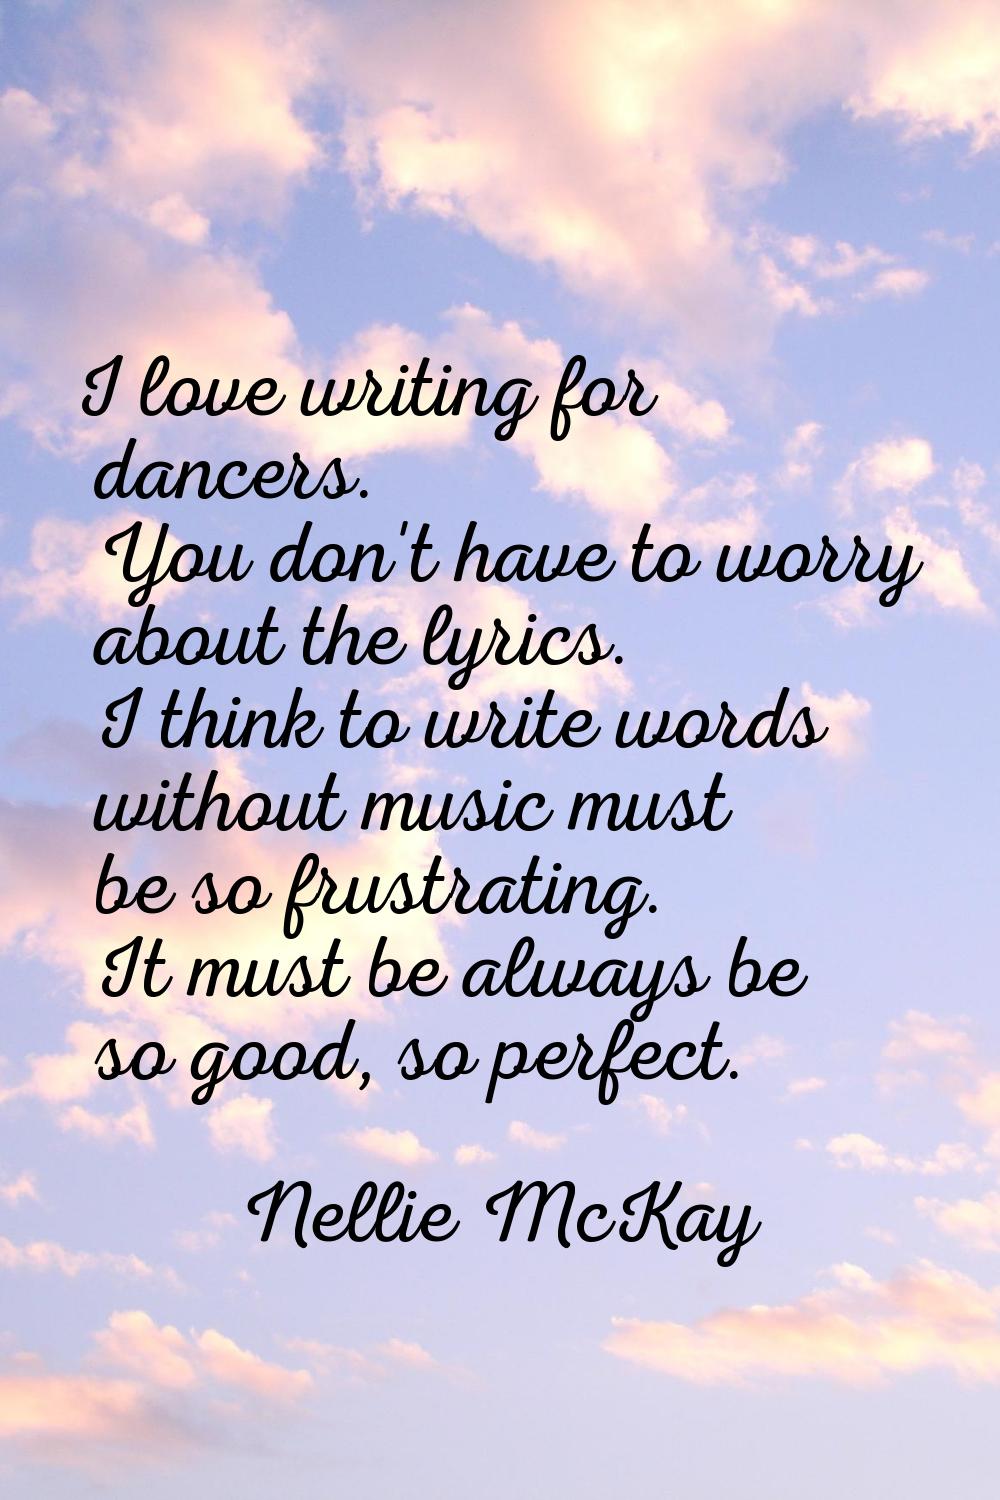 I love writing for dancers. You don't have to worry about the lyrics. I think to write words withou